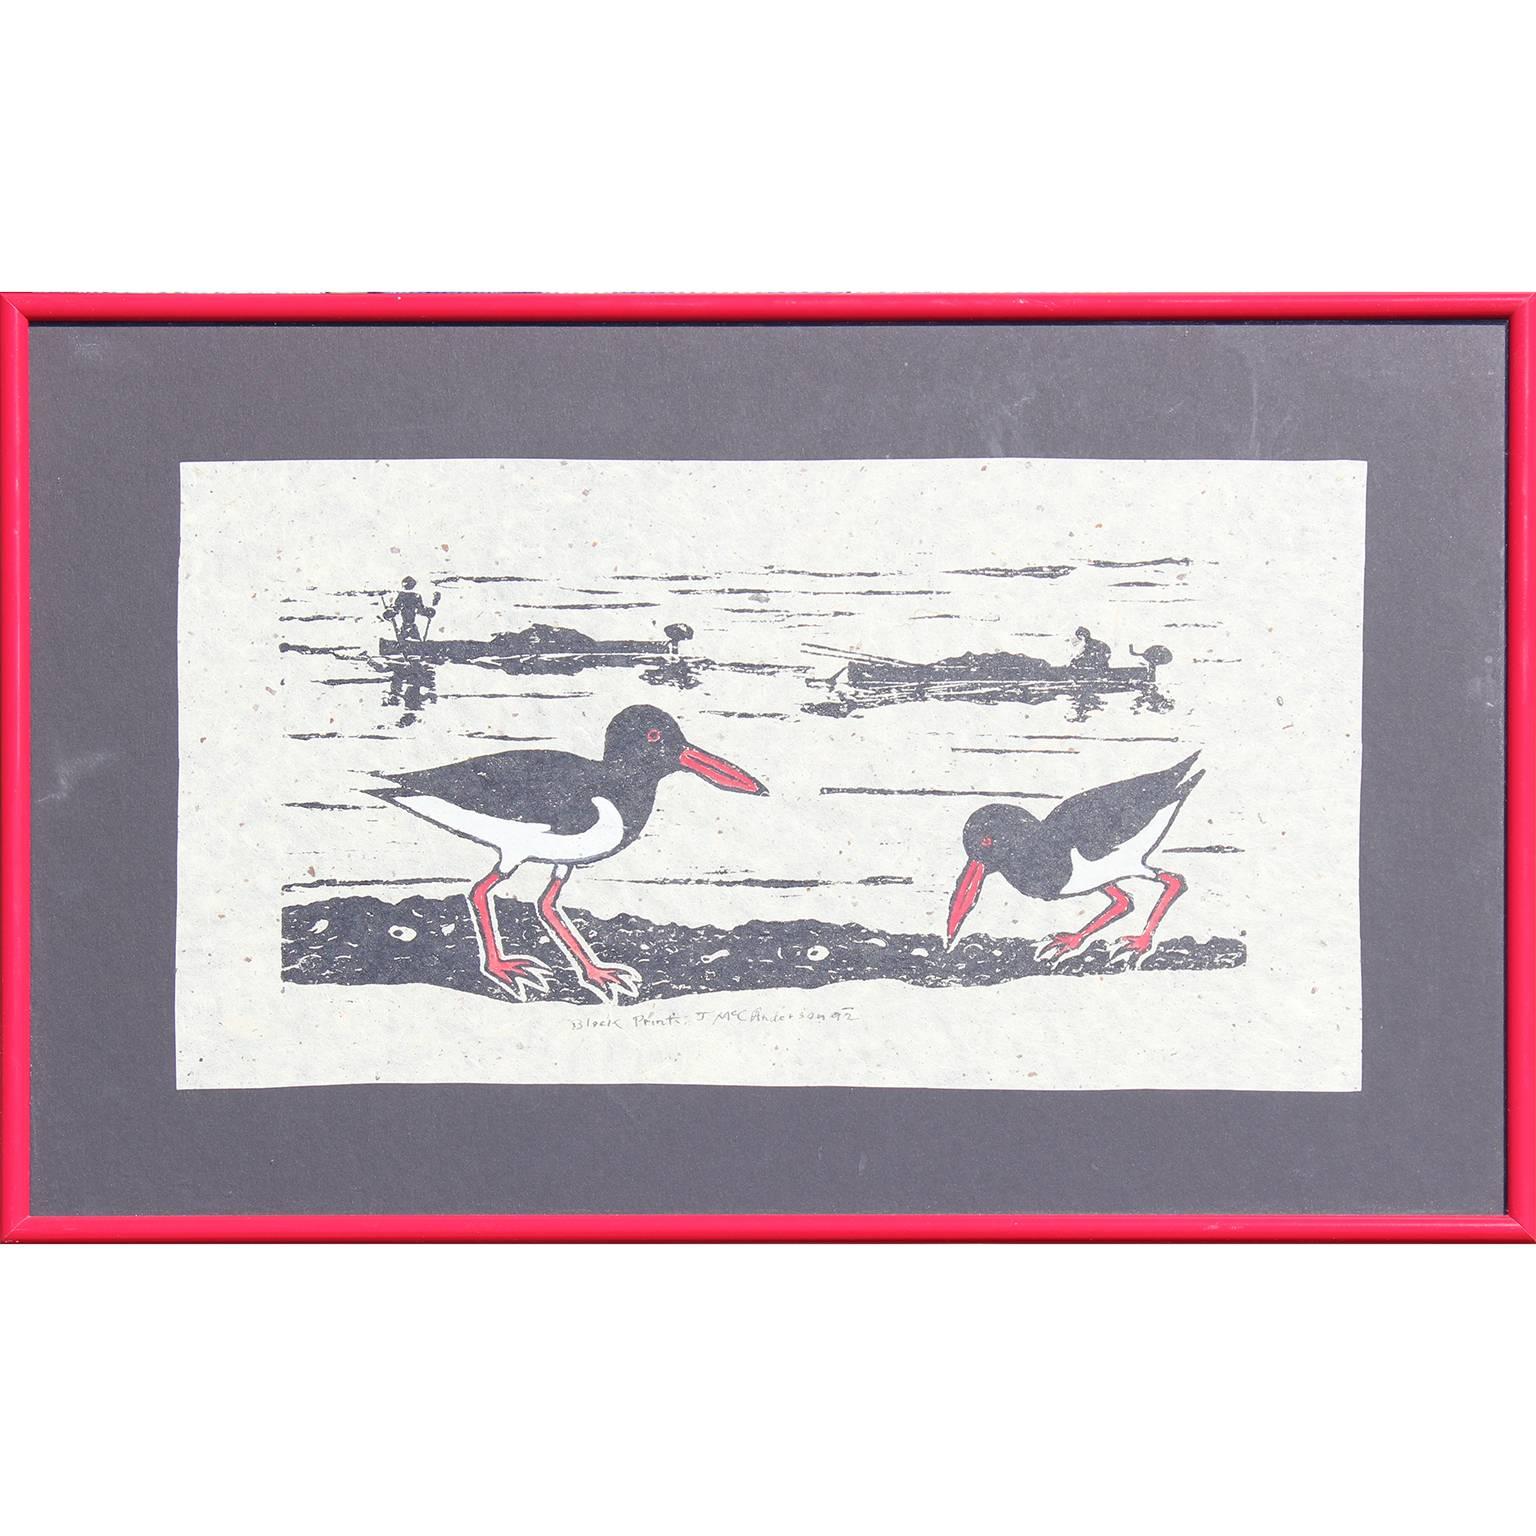 James McConnell (Mac) Anderson Animal Print - Oyster Catchers Block Print 